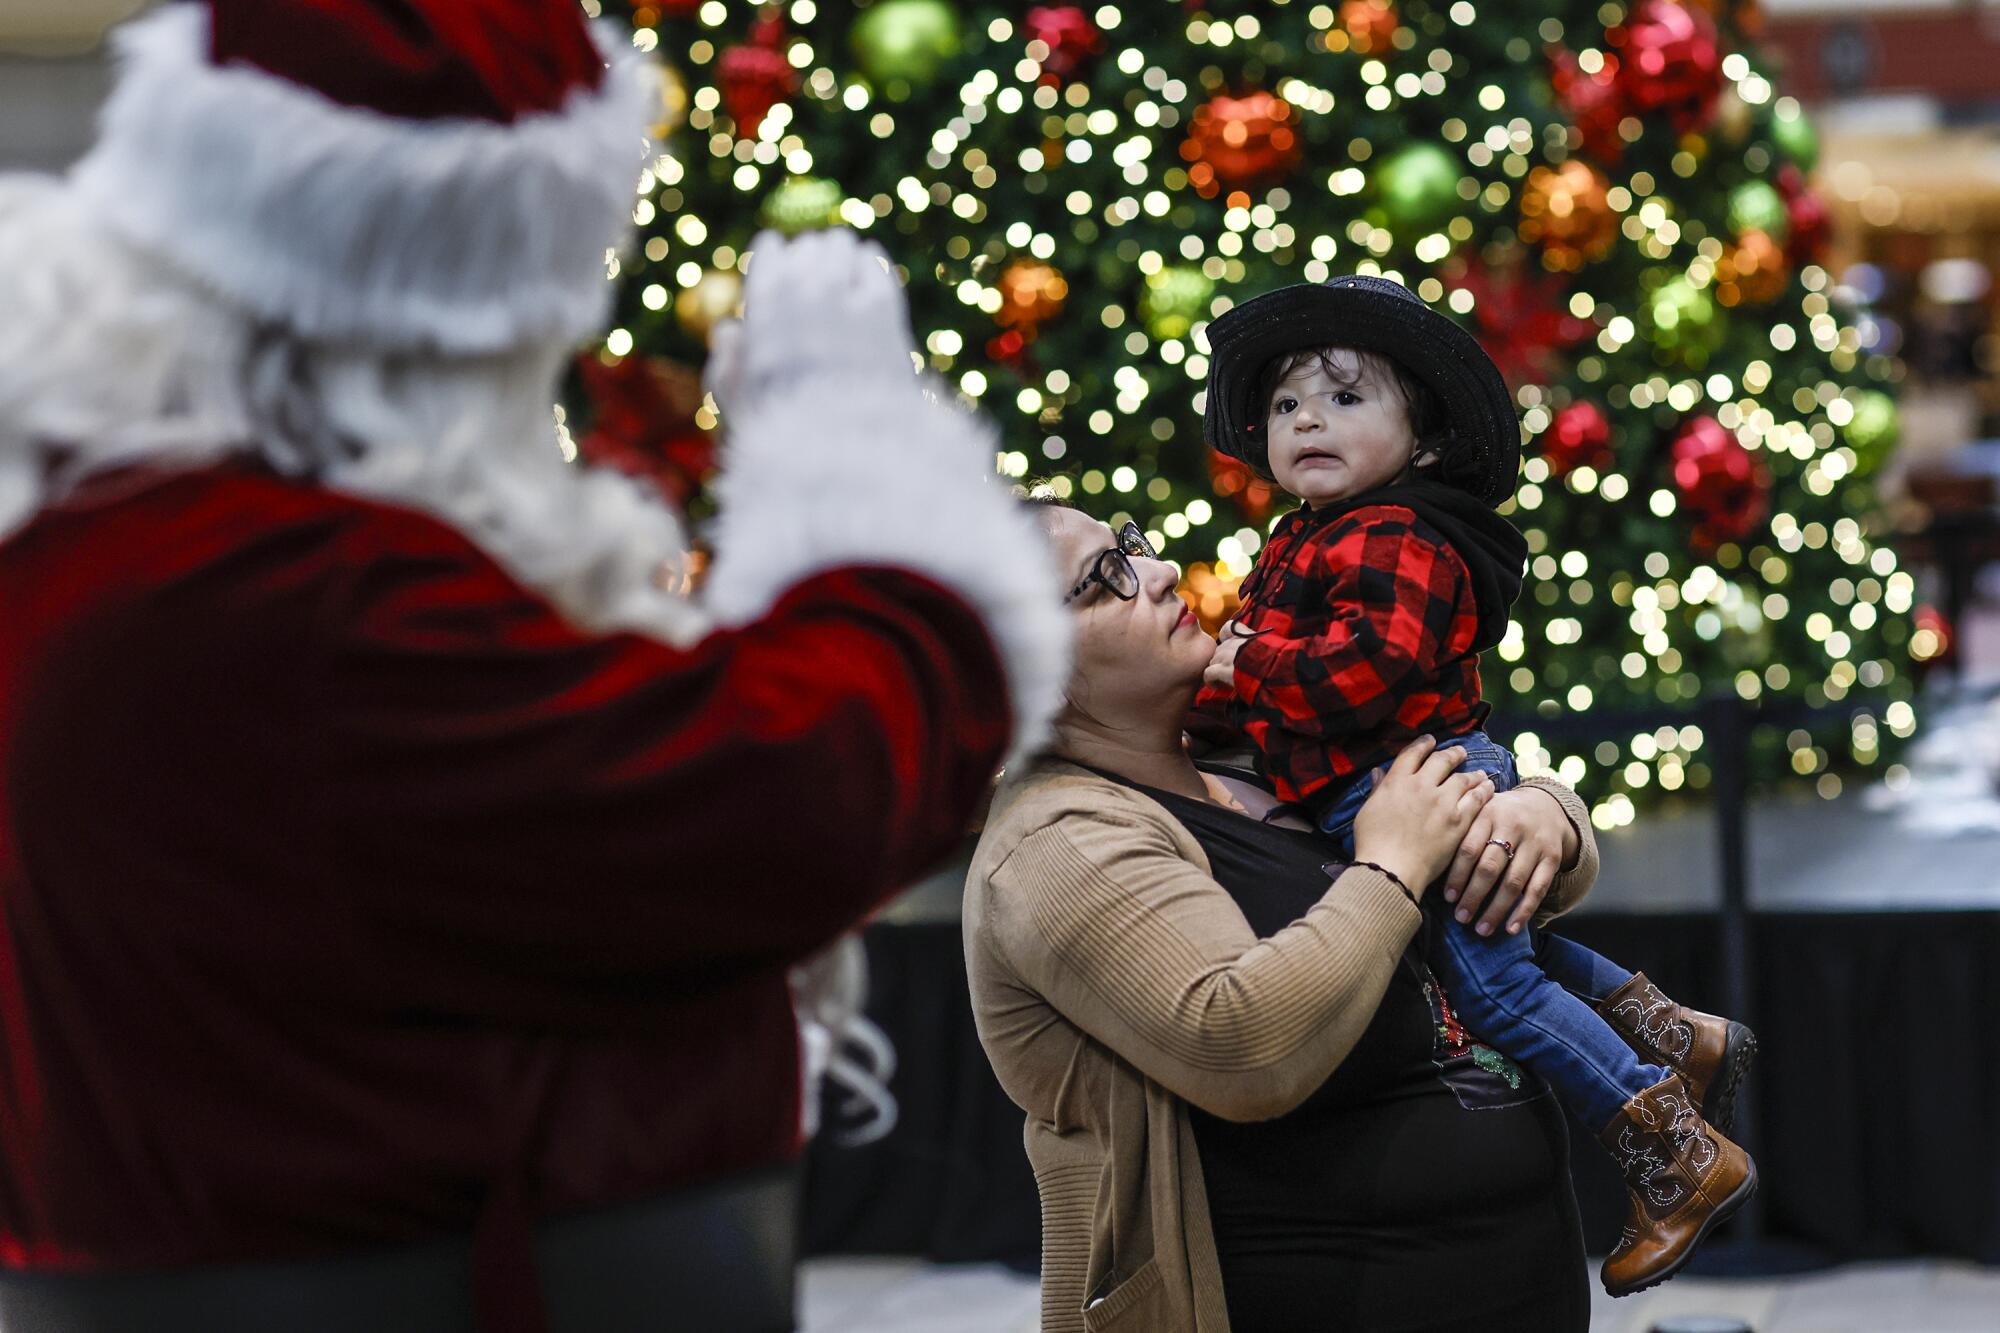 Adan Gonzalez is carried by his mother, Anjelica, to a Santa Claus photo spot at the Puente Hills Mall.